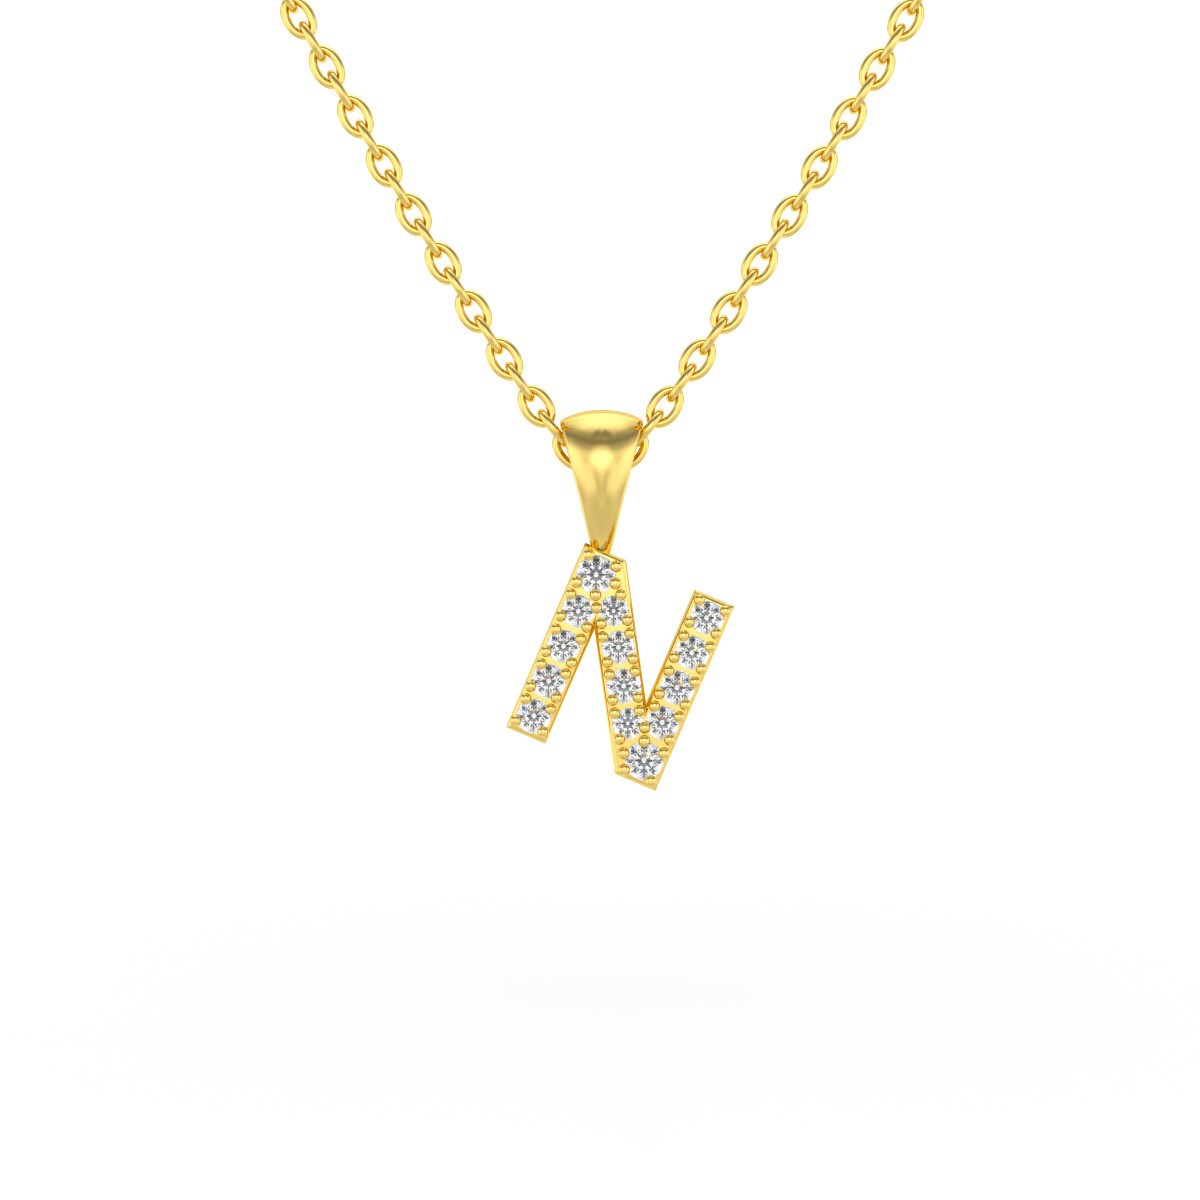 Collier Pendentif ADEN Lettre N Or 750 Jaune Diamant Chaine Or 750 incluse 0.72grs